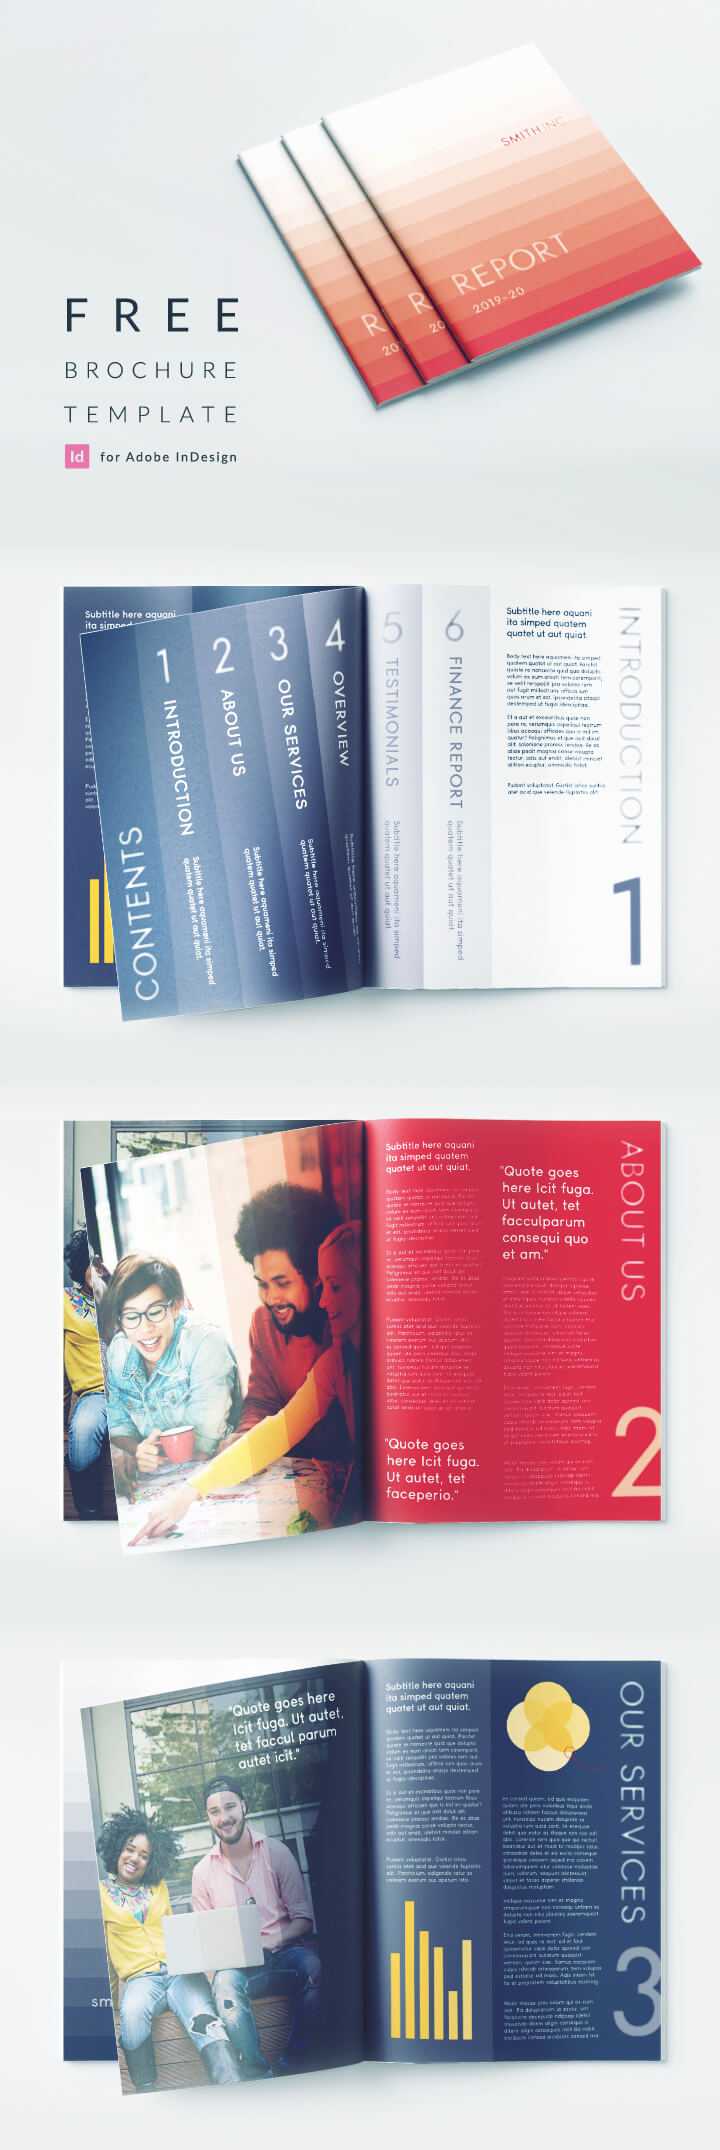 Elegant Corporate Brochure Or Report Indesign Template With Regard To Free Annual Report Template Indesign